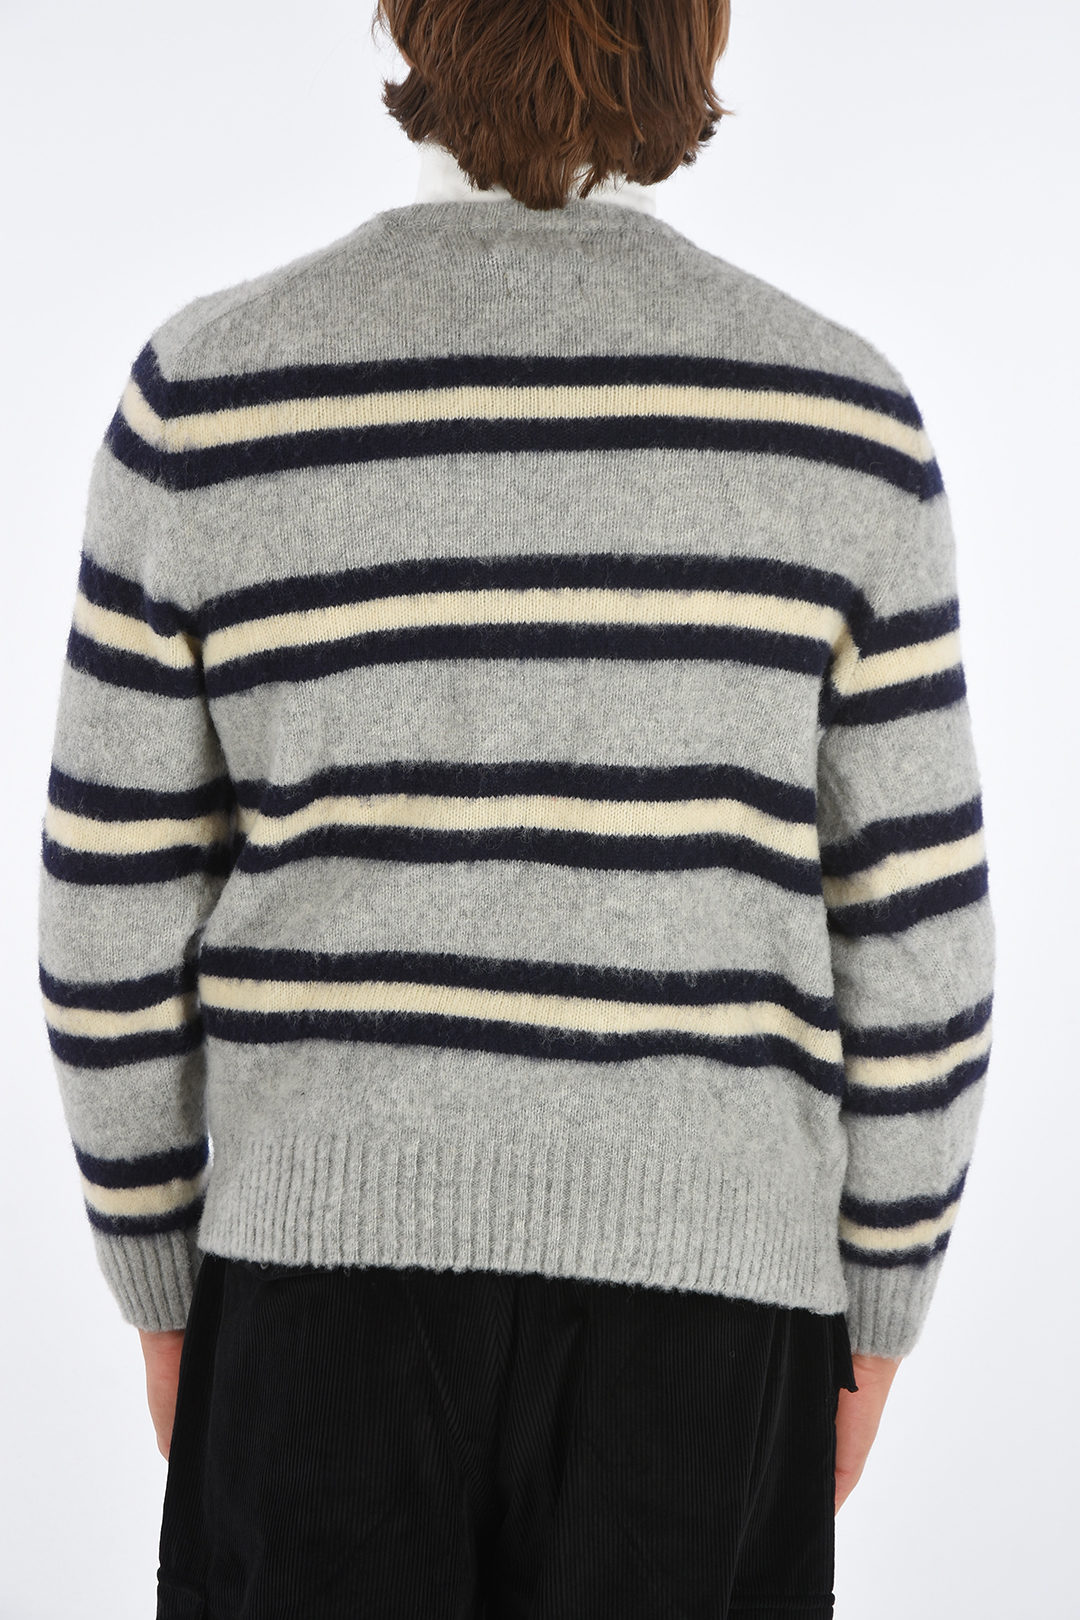 Howlin striped crew-neck sweater men - Glamood Outlet